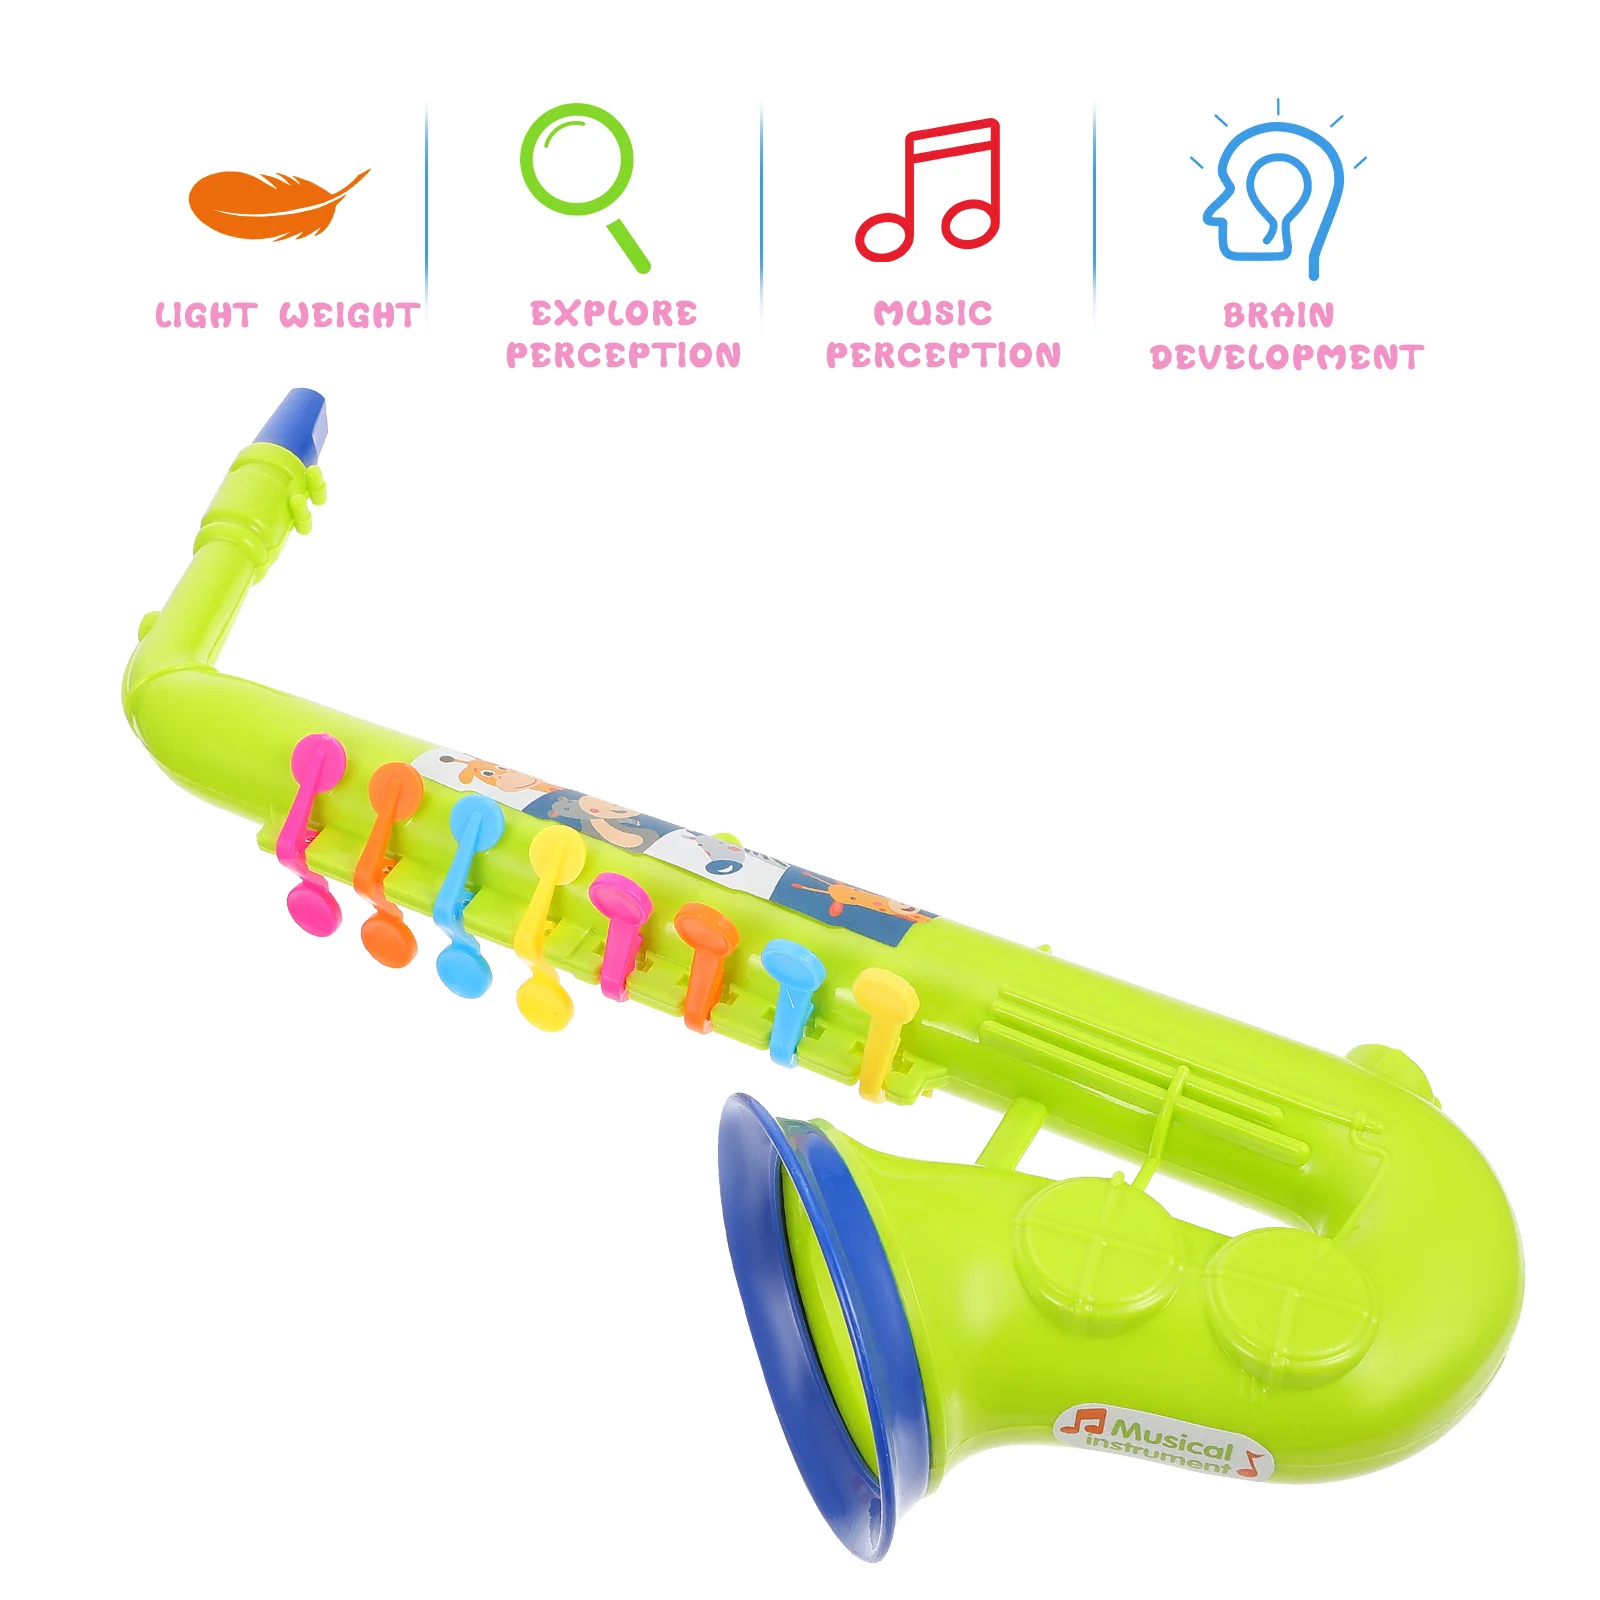 

Baby Toys Simulated Musical Practical Instrument Plaything Saxophone for Toddlers Abs Preschool